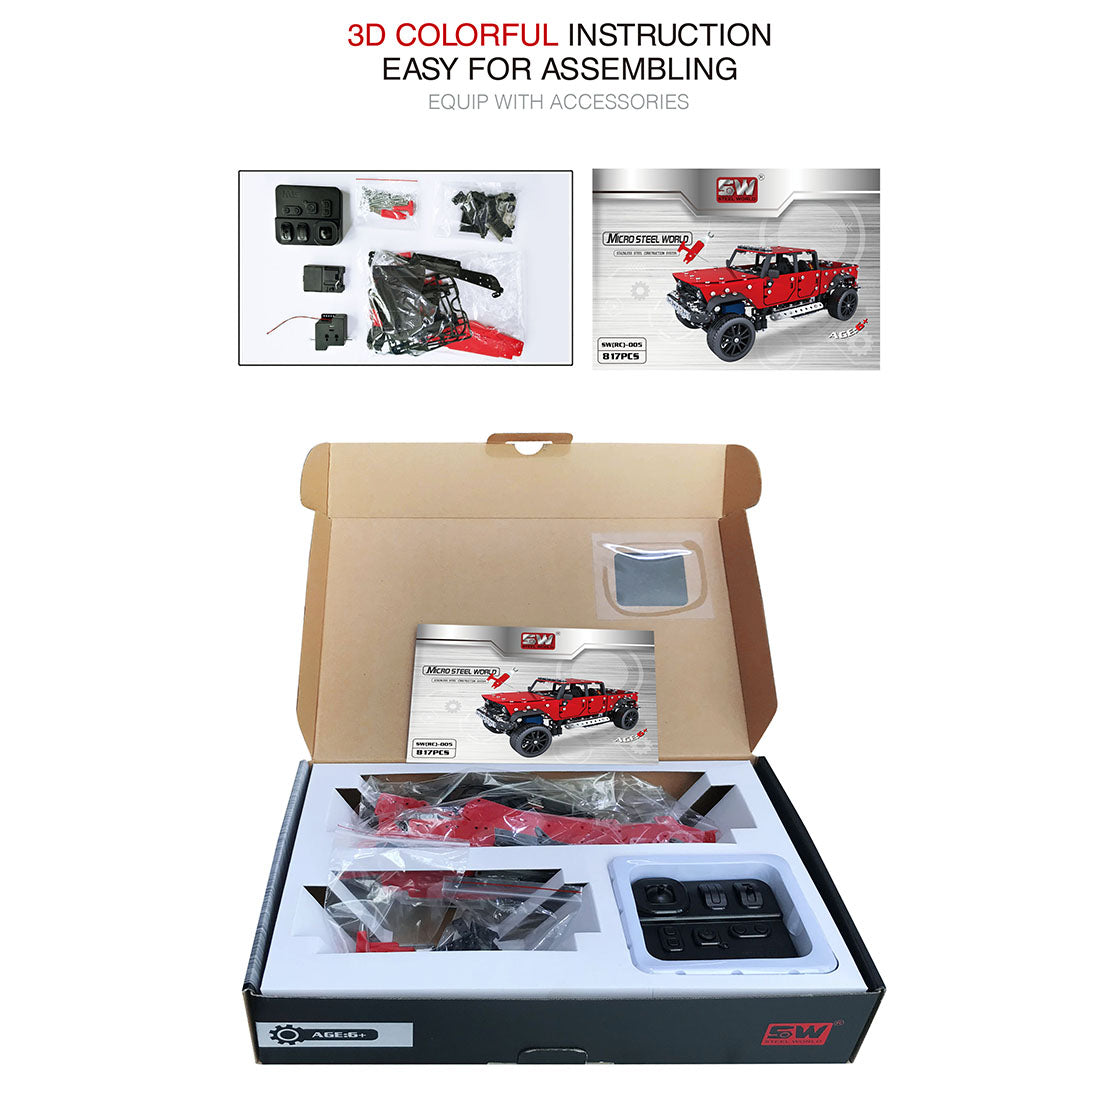 817Pcs 1:16 2.4G 6CH Metal RC Pickup Off-road Truck Vehicle Puzzle Toy